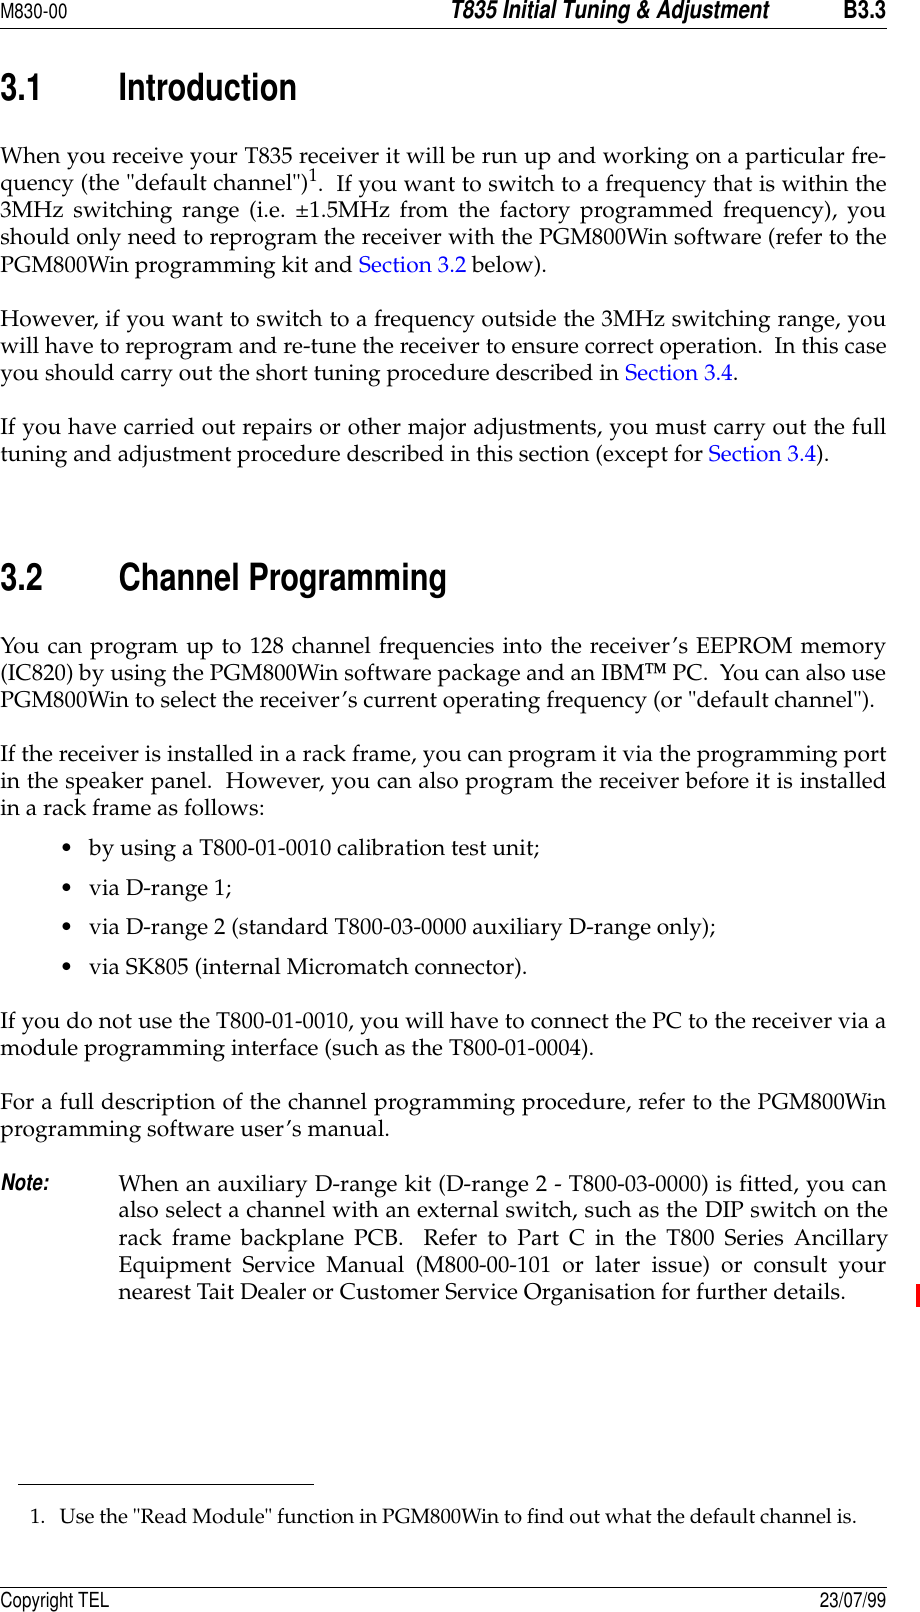 M830-00T835 Initial Tuning &amp; AdjustmentB3.3Copyright TEL 23/07/993.1 IntroductionWhen you receive your T835 receiver it will be run up and working on a particular fre-quency (the &quot;default channel&quot;)1.  If you want to switch to a frequency that is within the3MHz switching range (i.e. ±1.5MHz from the factory programmed frequency), youshould only need to reprogram the receiver with the PGM800Win software (refer to thePGM800Win programming kit and Section 3.2 below).  However, if you want to switch to a frequency outside the 3MHz switching range, youwill have to reprogram and re-tune the receiver to ensure correct operation.  In this caseyou should carry out the short tuning procedure described in Section 3.4.If you have carried out repairs or other major adjustments, you must carry out the fulltuning and adjustment procedure described in this section (except for Section 3.4).  3.2 Channel ProgrammingYou can program up to 128 channel frequencies into the receiver’s EEPROM memory(IC820) by using the PGM800Win software package and an IBM PC.  You can also usePGM800Win to select the receiver’s current operating frequency (or &quot;default channel&quot;).If the receiver is installed in a rack frame, you can program it via the programming portin the speaker panel.  However, you can also program the receiver before it is installedin a rack frame as follows:• by using a T800-01-0010 calibration test unit;• via D-range 1;• via D-range 2 (standard T800-03-0000 auxiliary D-range only);• via SK805 (internal Micromatch connector).If you do not use the T800-01-0010, you will have to connect the PC to the receiver via amodule programming interface (such as the T800-01-0004).For a full description of the channel programming procedure, refer to the PGM800Winprogramming software user’s manual.Note:When an auxiliary D-range kit (D-range 2 - T800-03-0000) is fitted, you canalso select a channel with an external switch, such as the DIP switch on therack frame backplane PCB.  Refer to Part C in the T800 Series AncillaryEquipment Service Manual (M800-00-101 or later issue) or consult yournearest Tait Dealer or Customer Service Organisation for further details.1. Use the &quot;Read Module&quot; function in PGM800Win to find out what the default channel is.